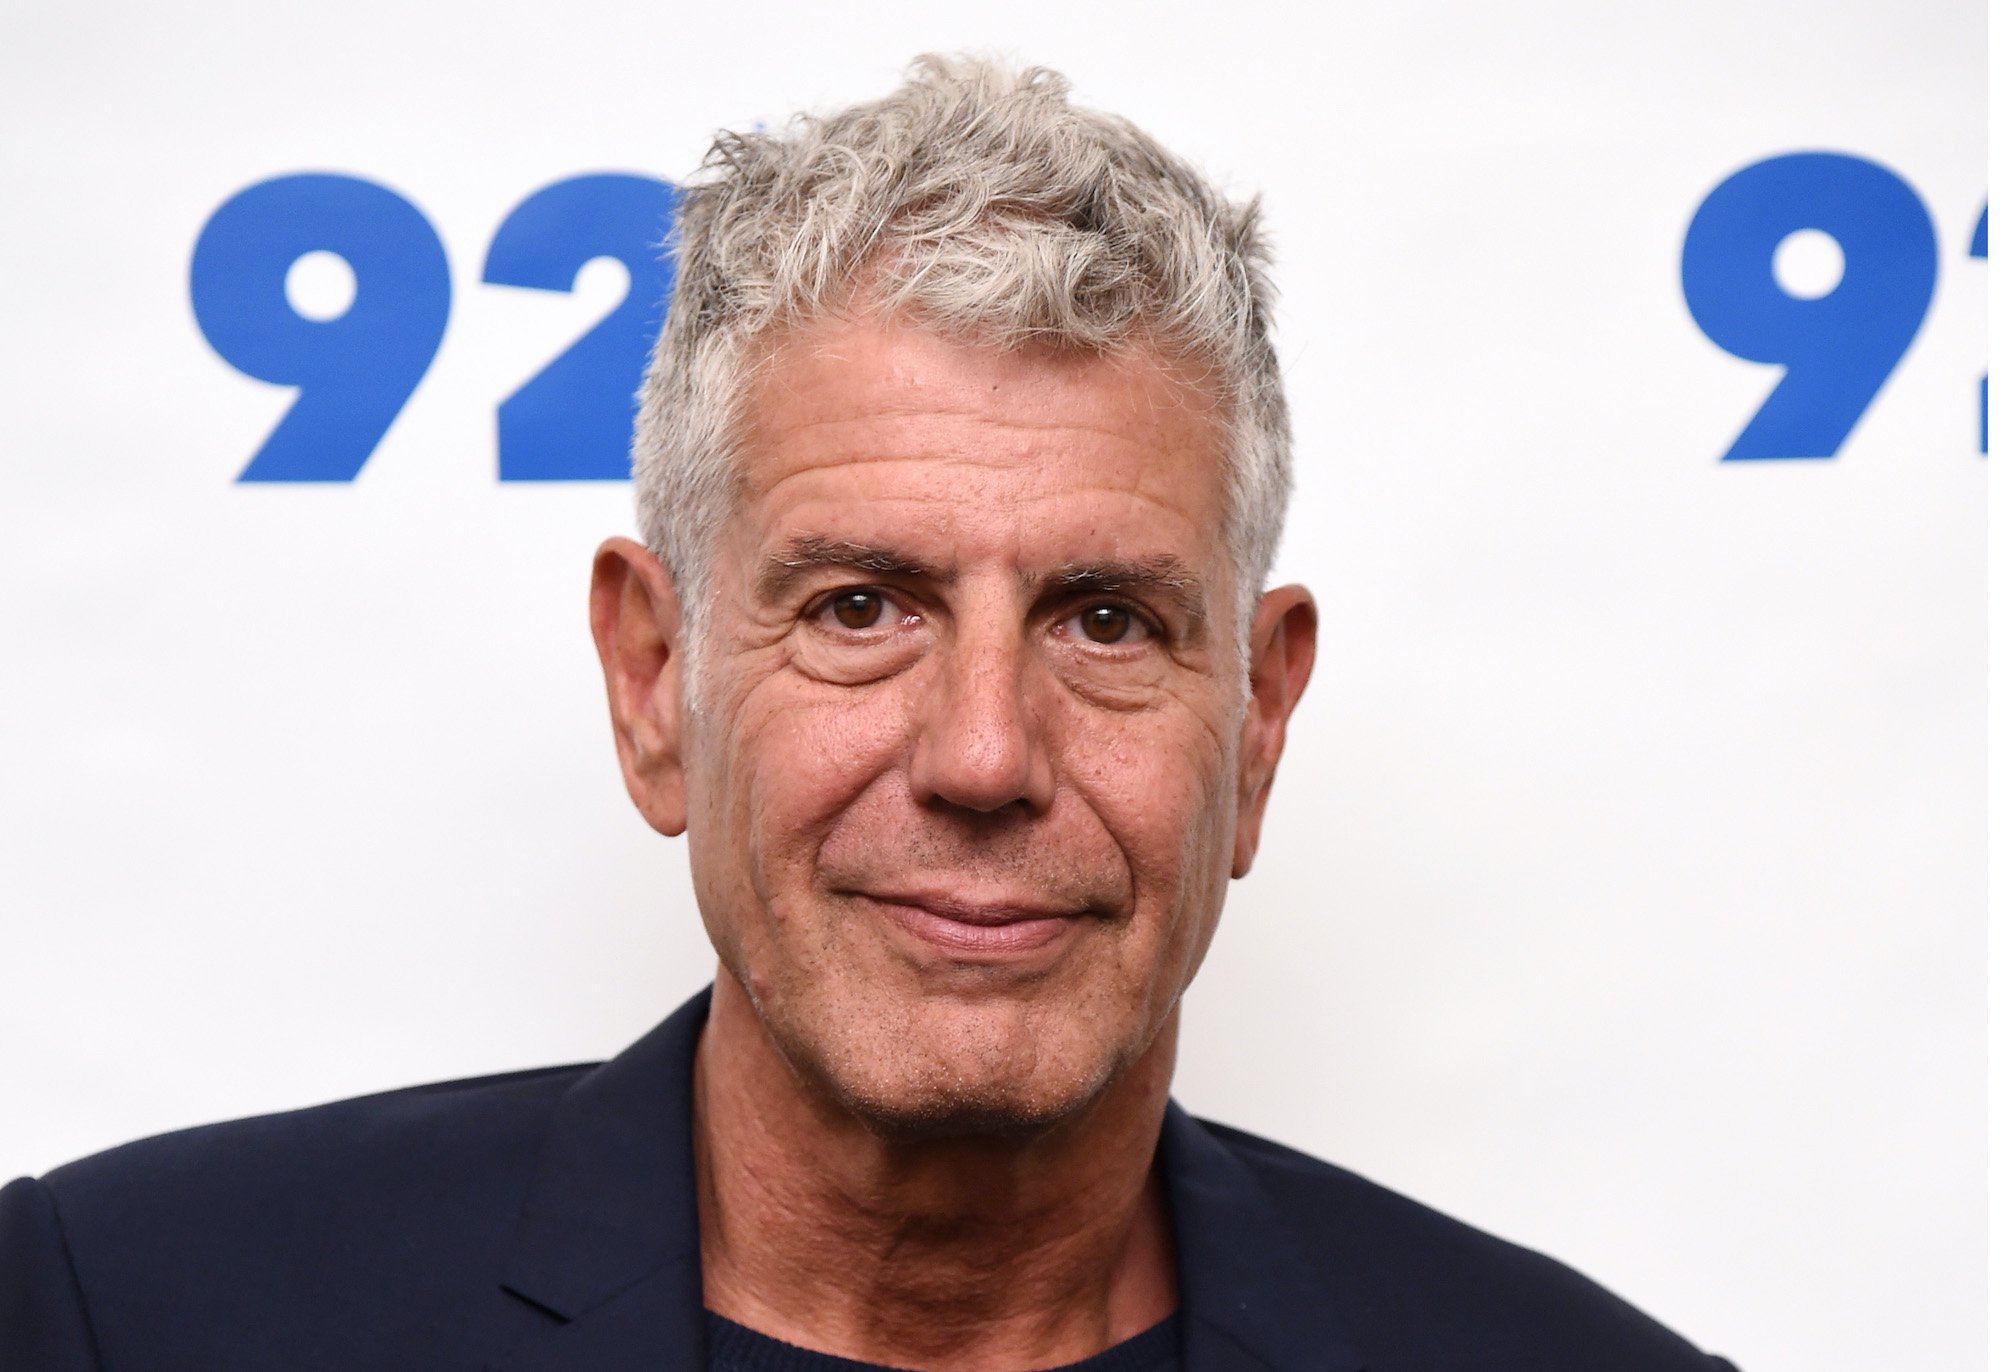 Anthony Bourdain smiling in front of a white background